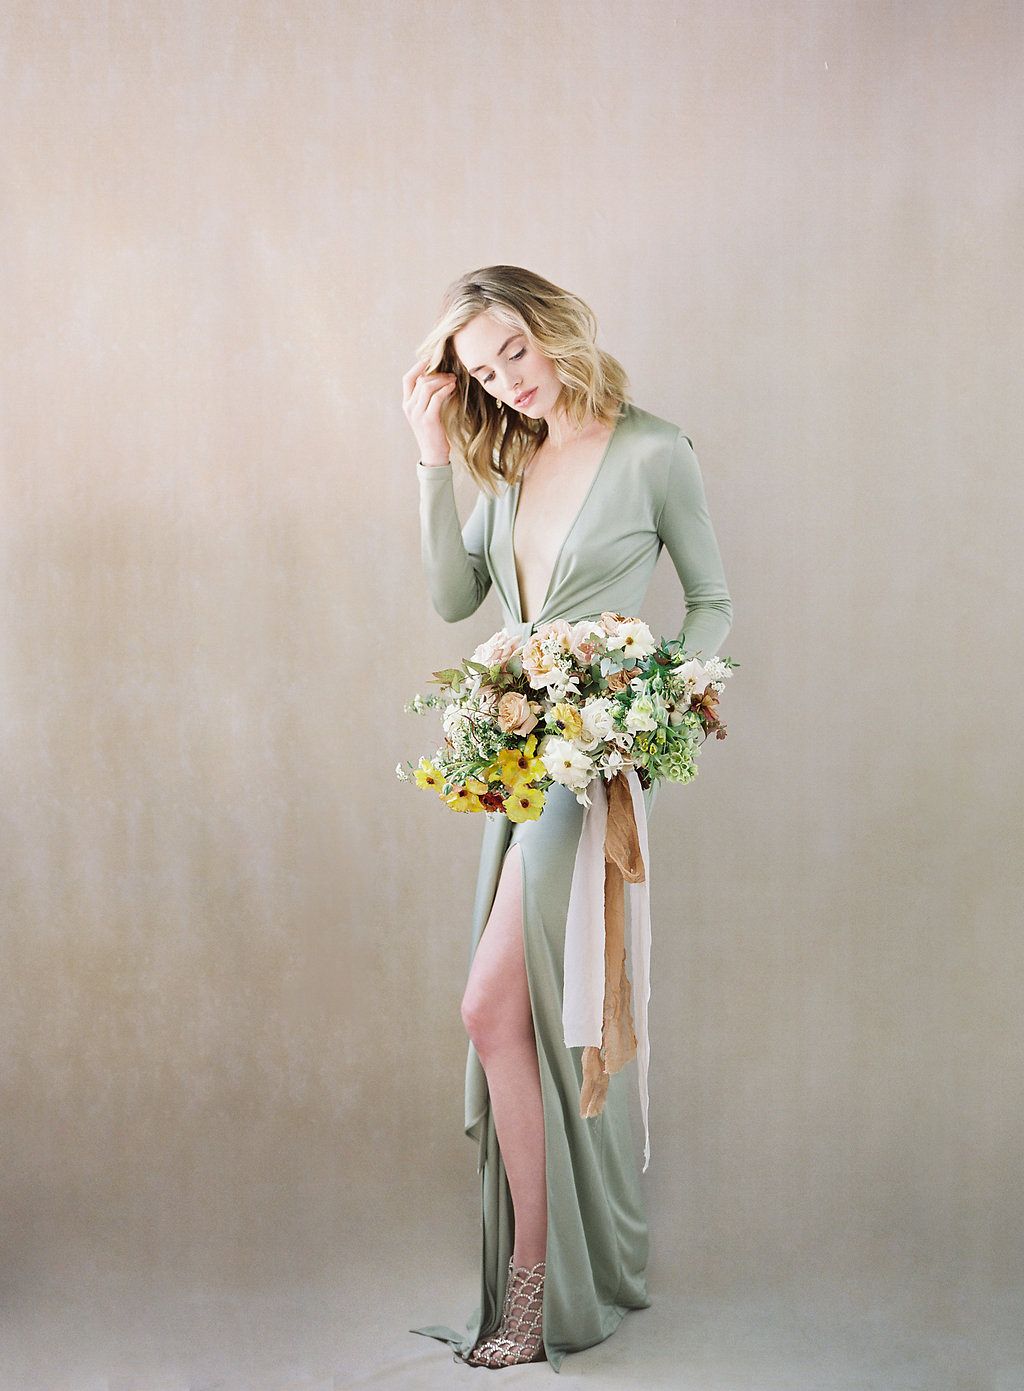 Contemporary and Feminine Bridal Session with an Organic Bouquet